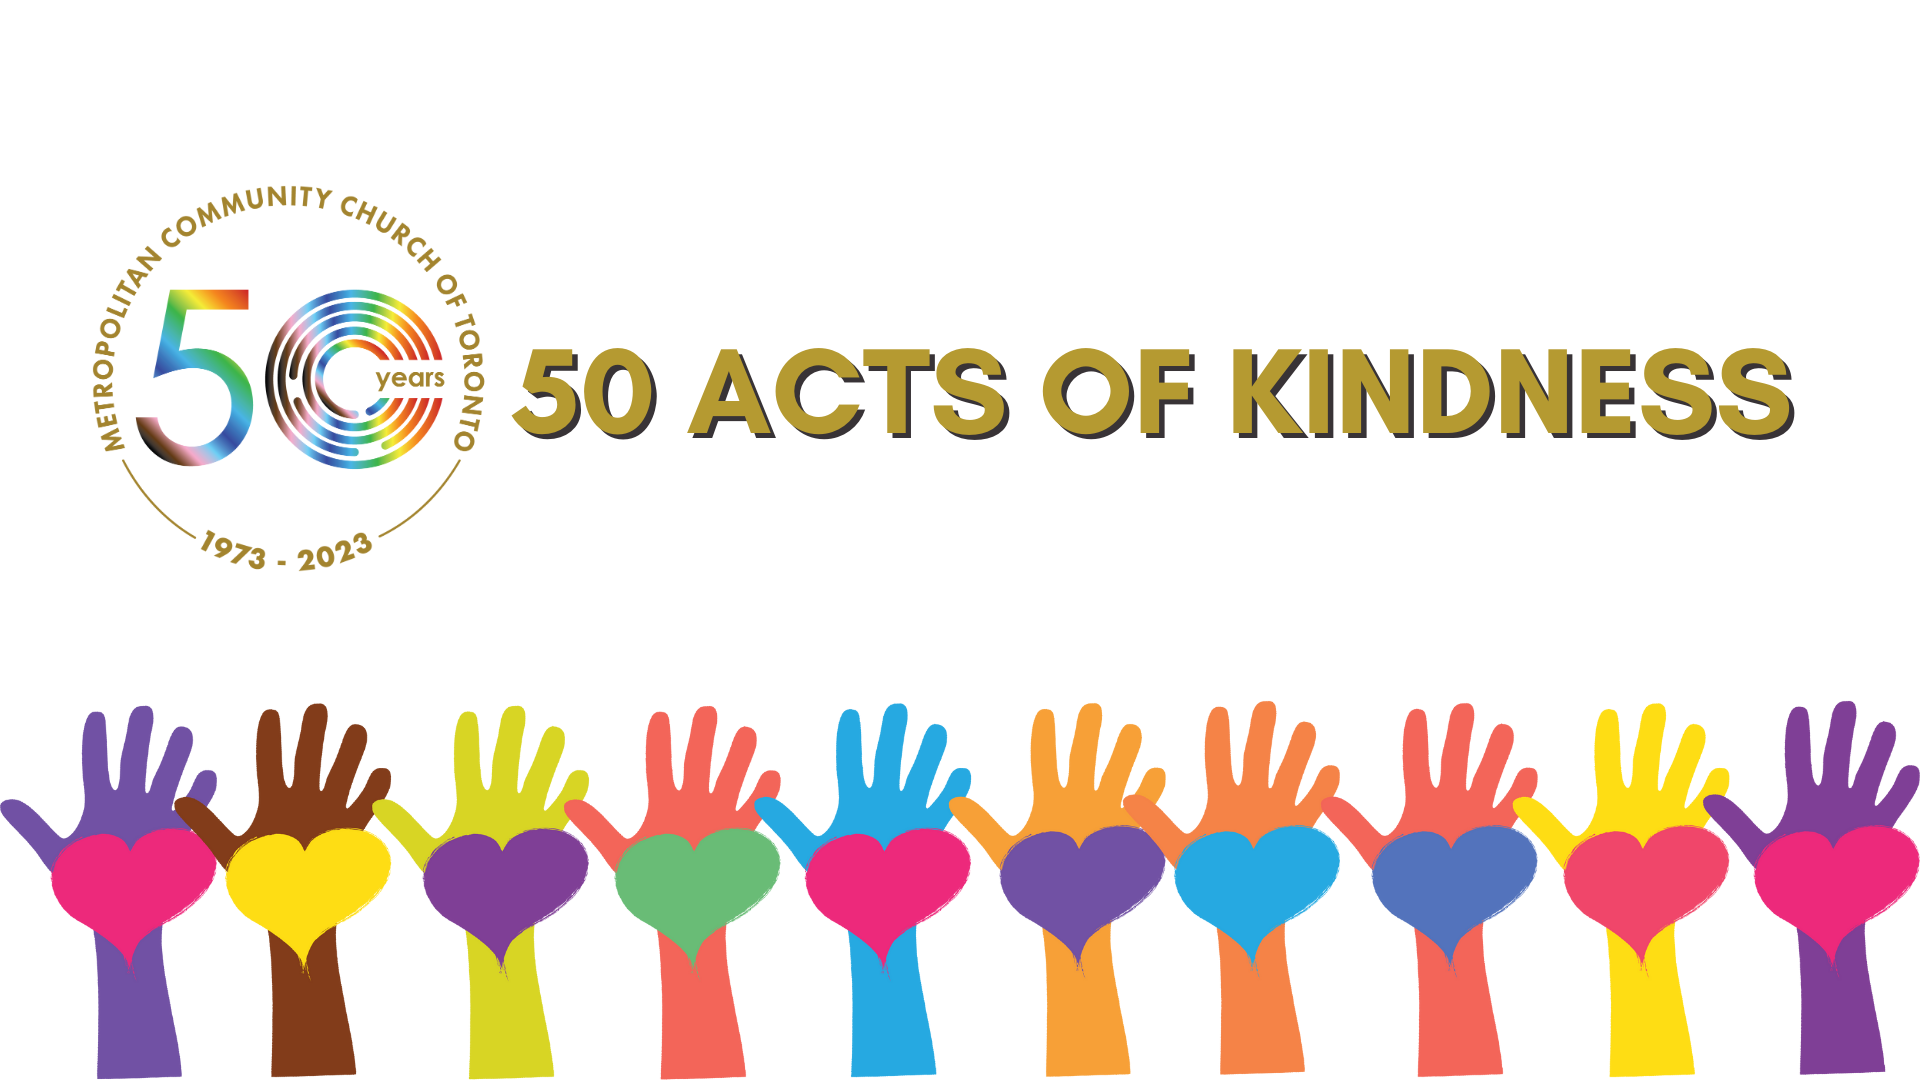 Picture of MCC Toronto's 50th Anniversary Logo and hands at the bottoms of the image holding hearts, with text saying 50 Acts of Kindness